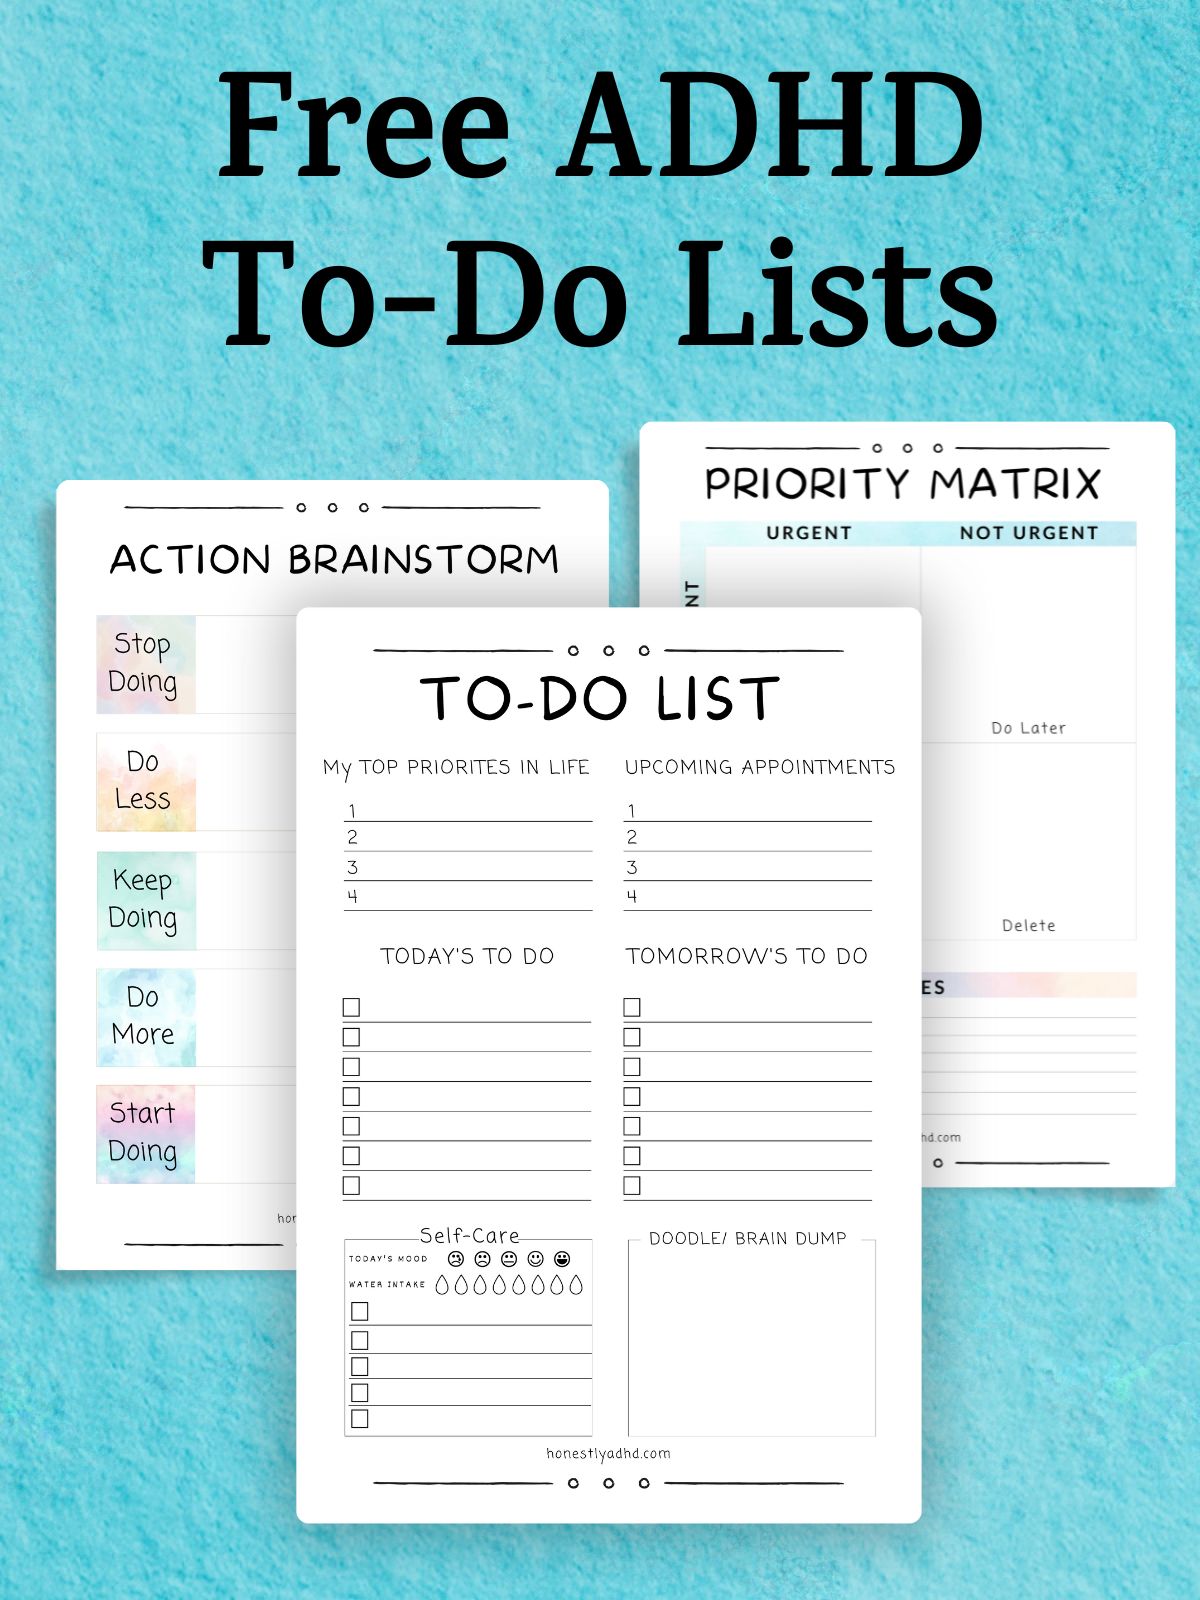 Examples of 3 free ADHD to-do list printable files.